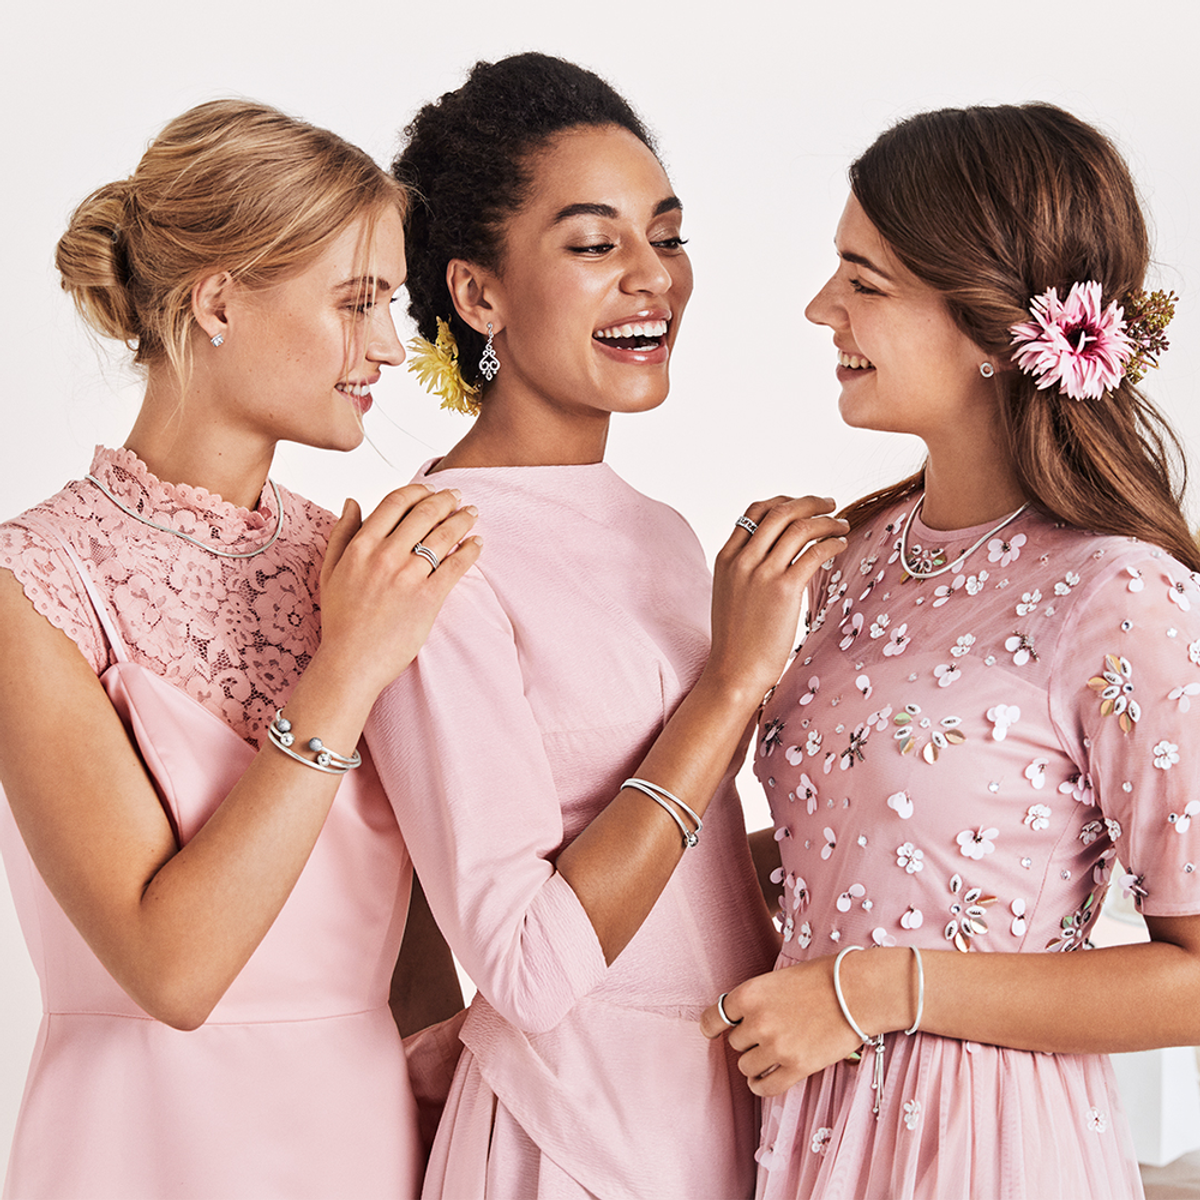 web_aw18_some_model_image_evergreen_bridesmaid_square_01.png